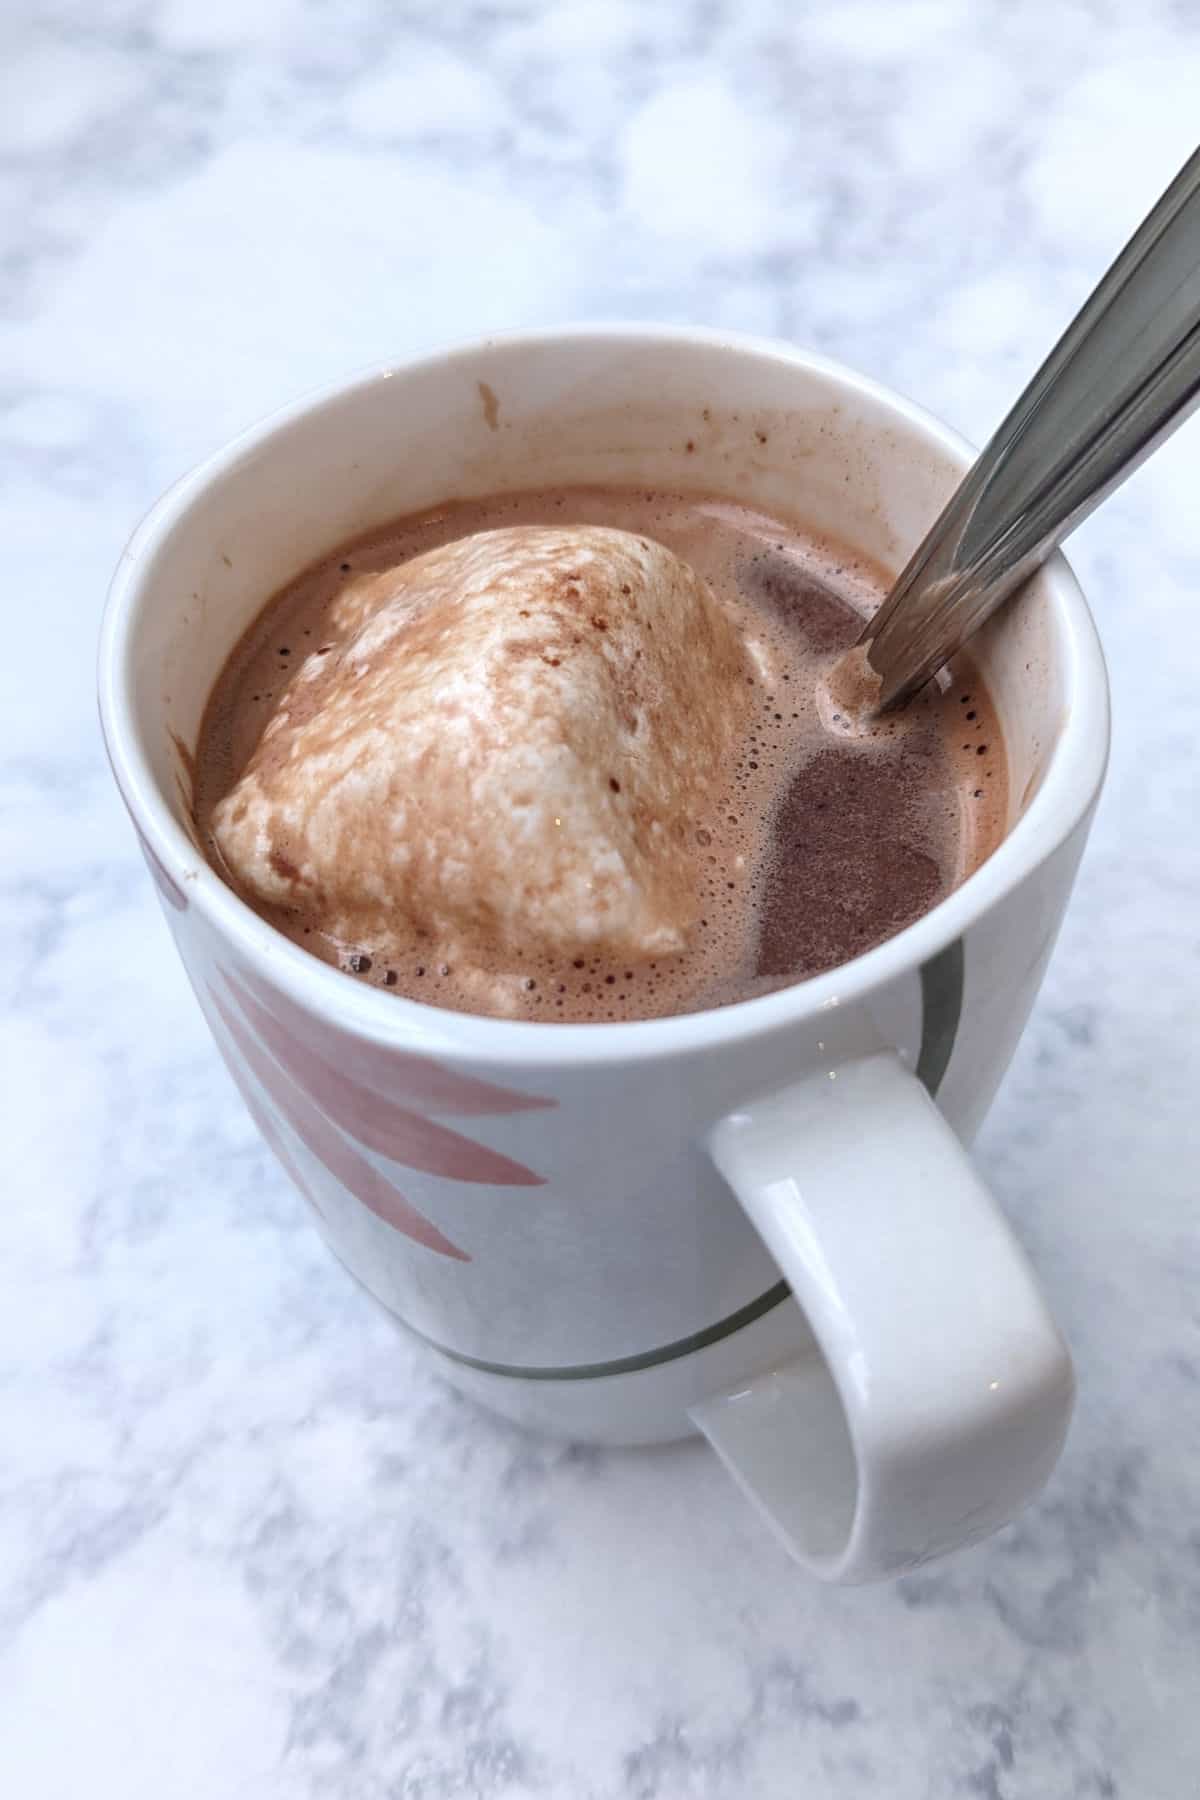 hot chocolate in a mug, with melted marshmallow and spoon